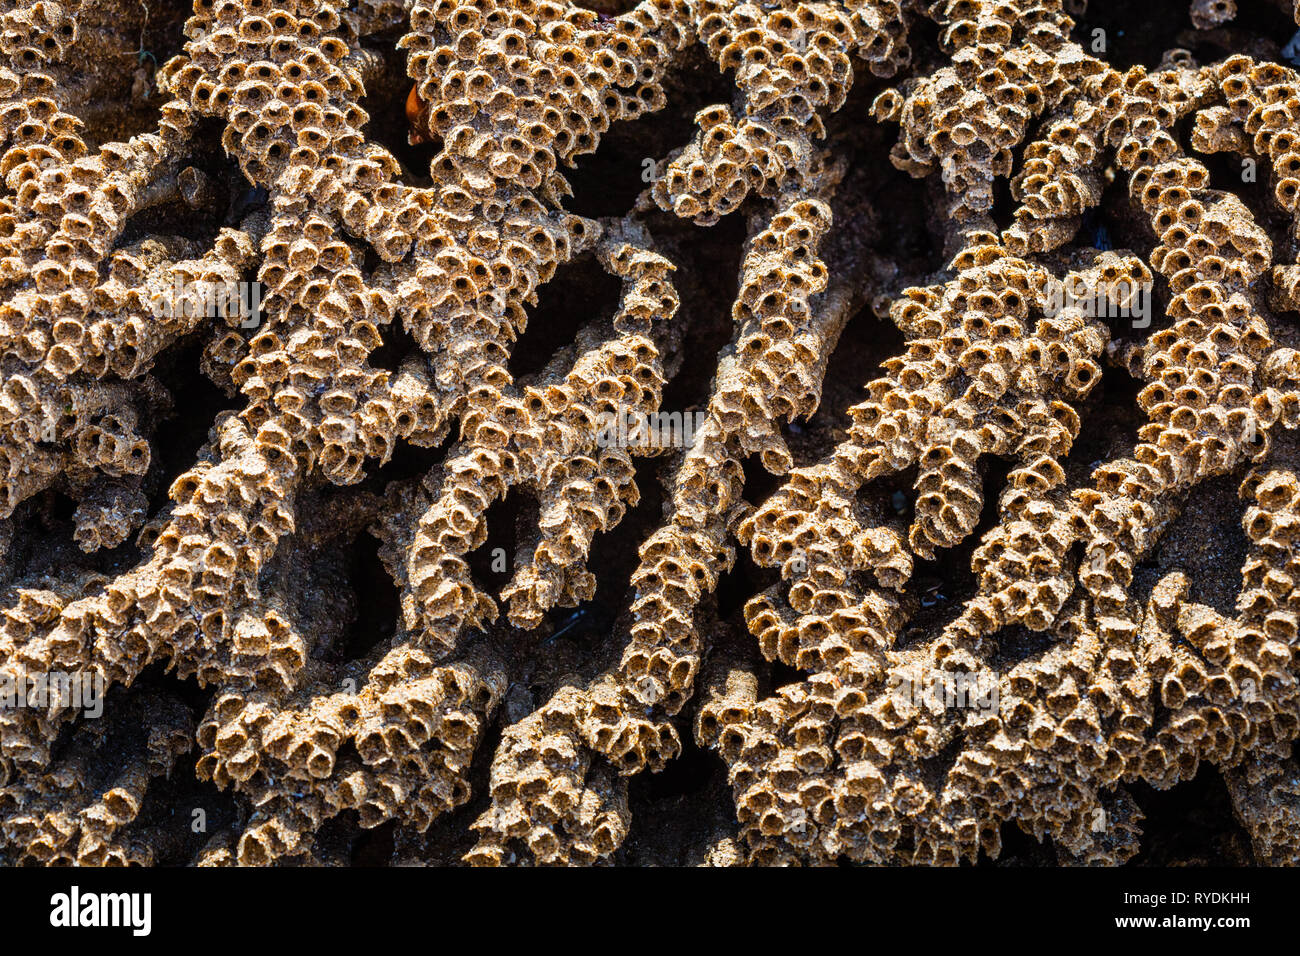 Sandy tubes of the Honeycomb Worm Sabellaria alveolata on rocks of the Gower peninsula in South Wales UK Stock Photo